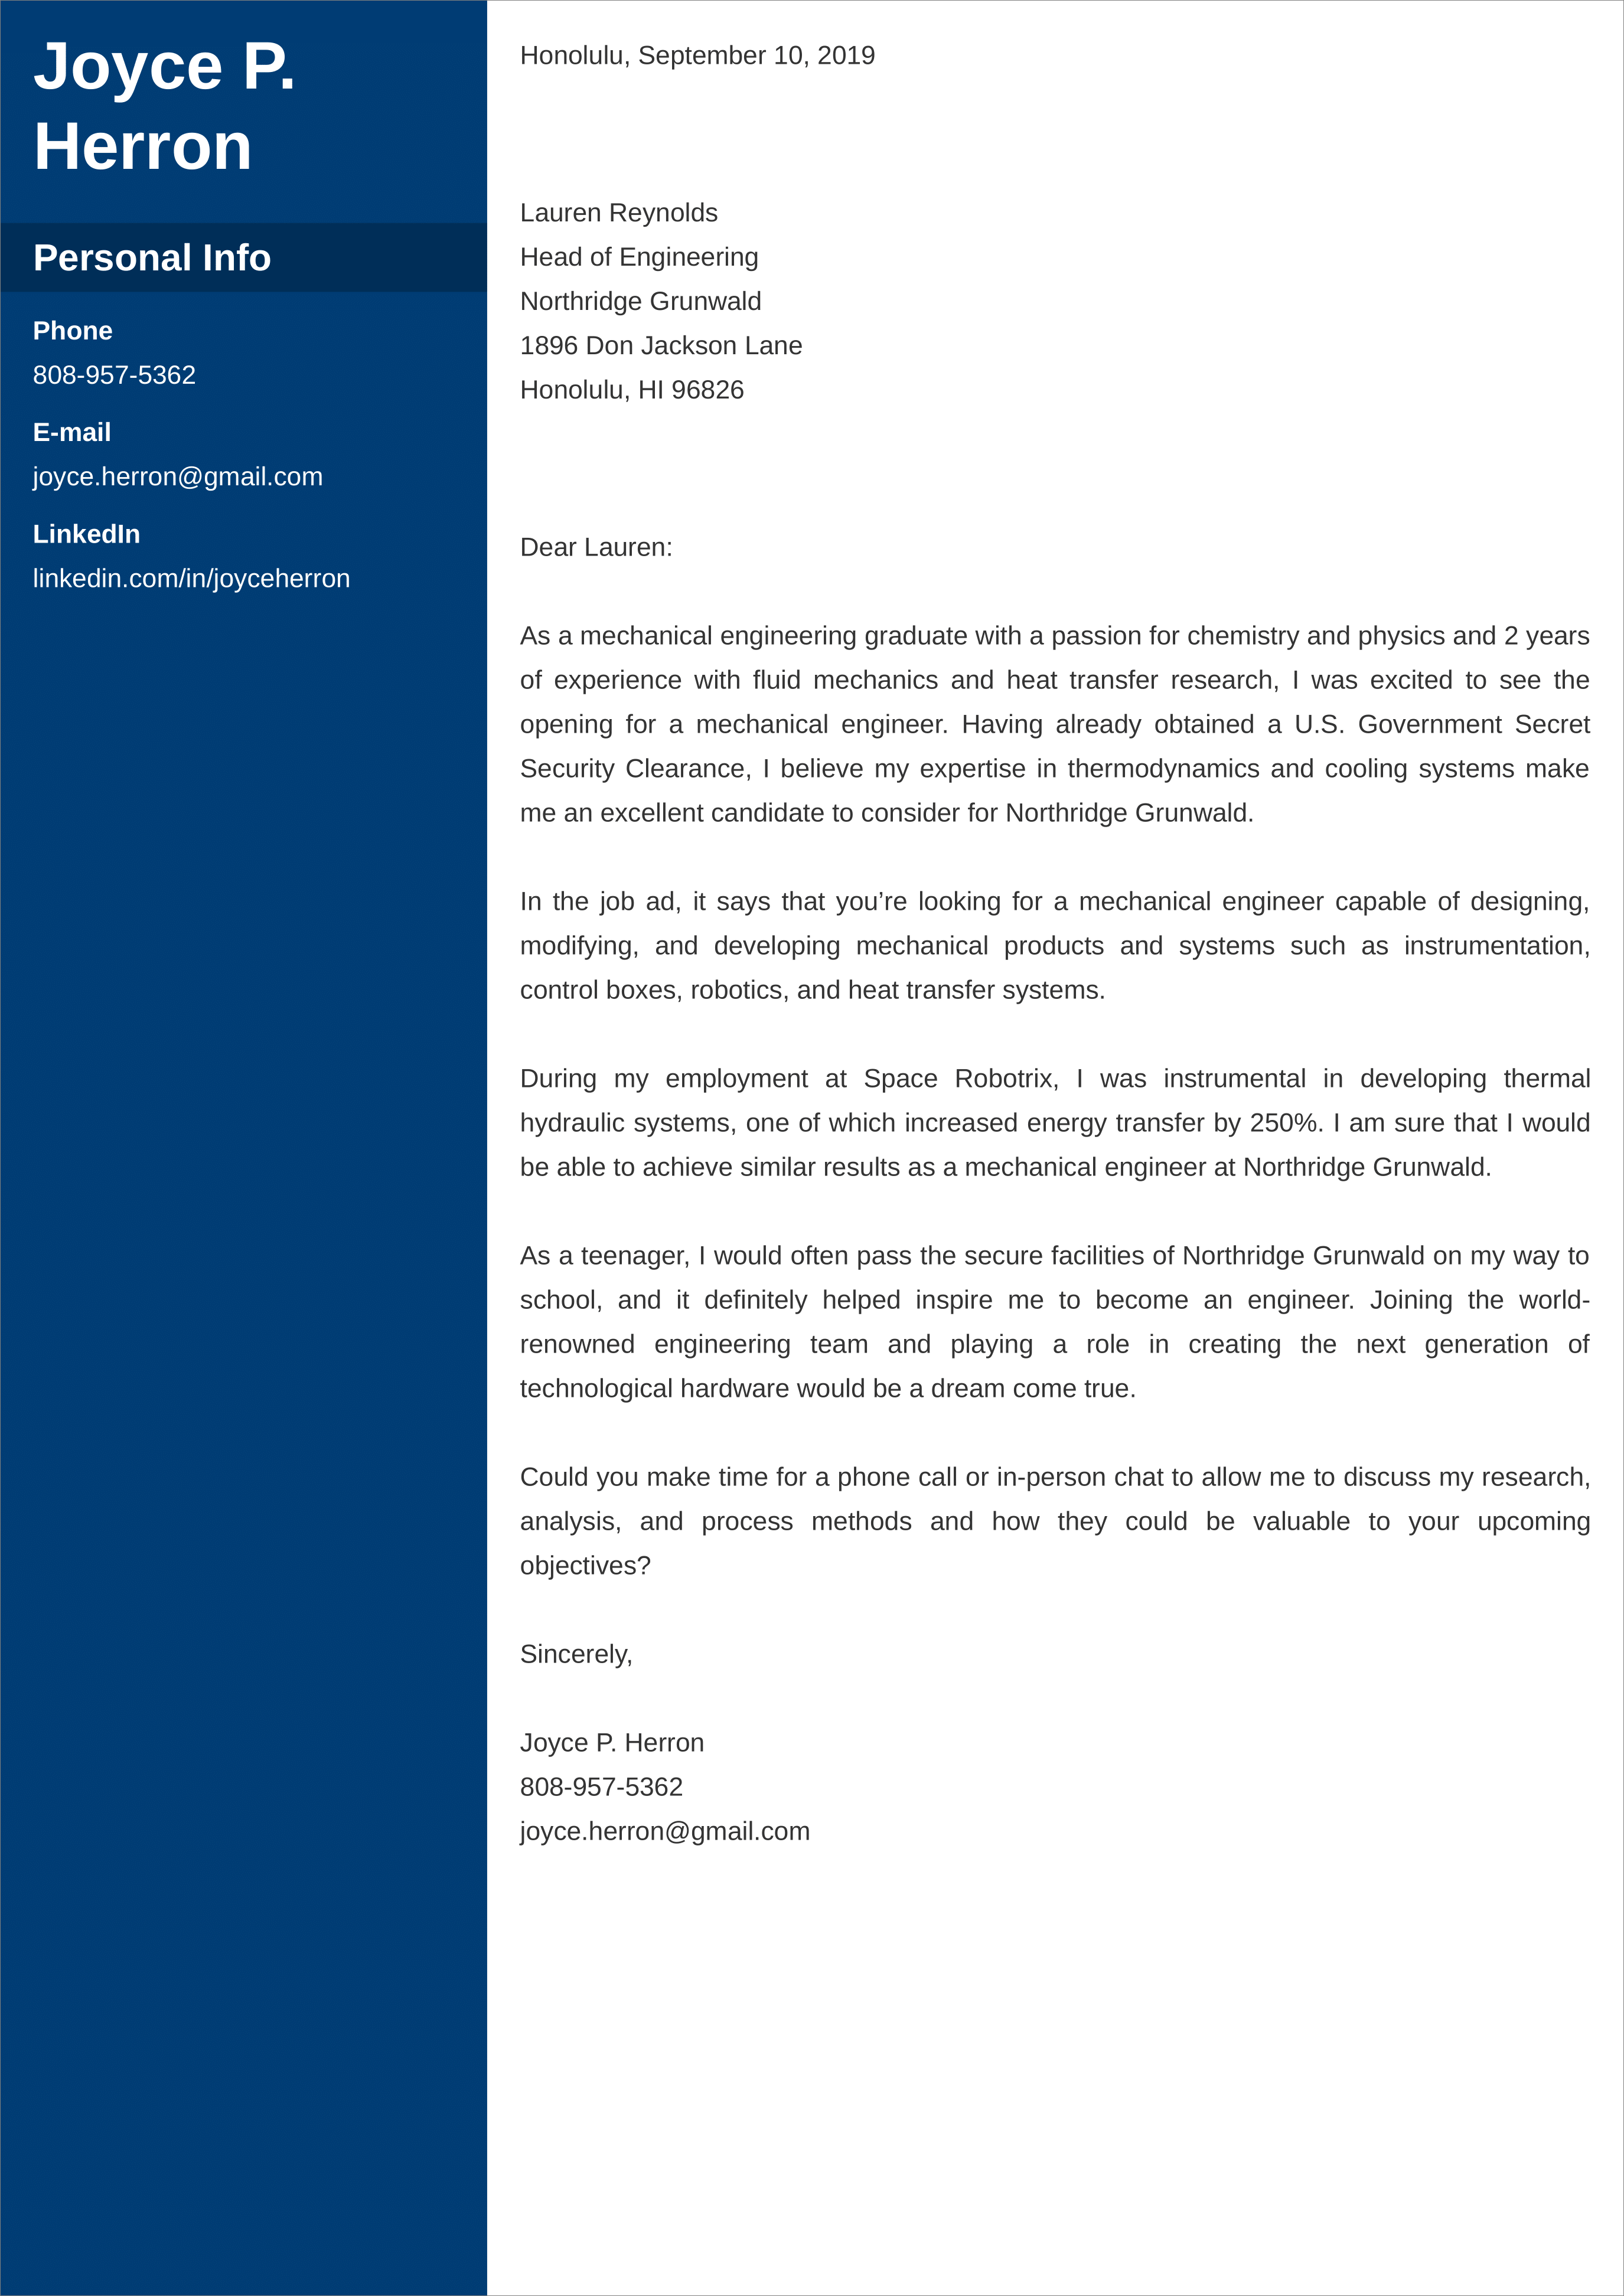 Cover Letter For Transfer Within Same Company from cdn-images.resumelab.com